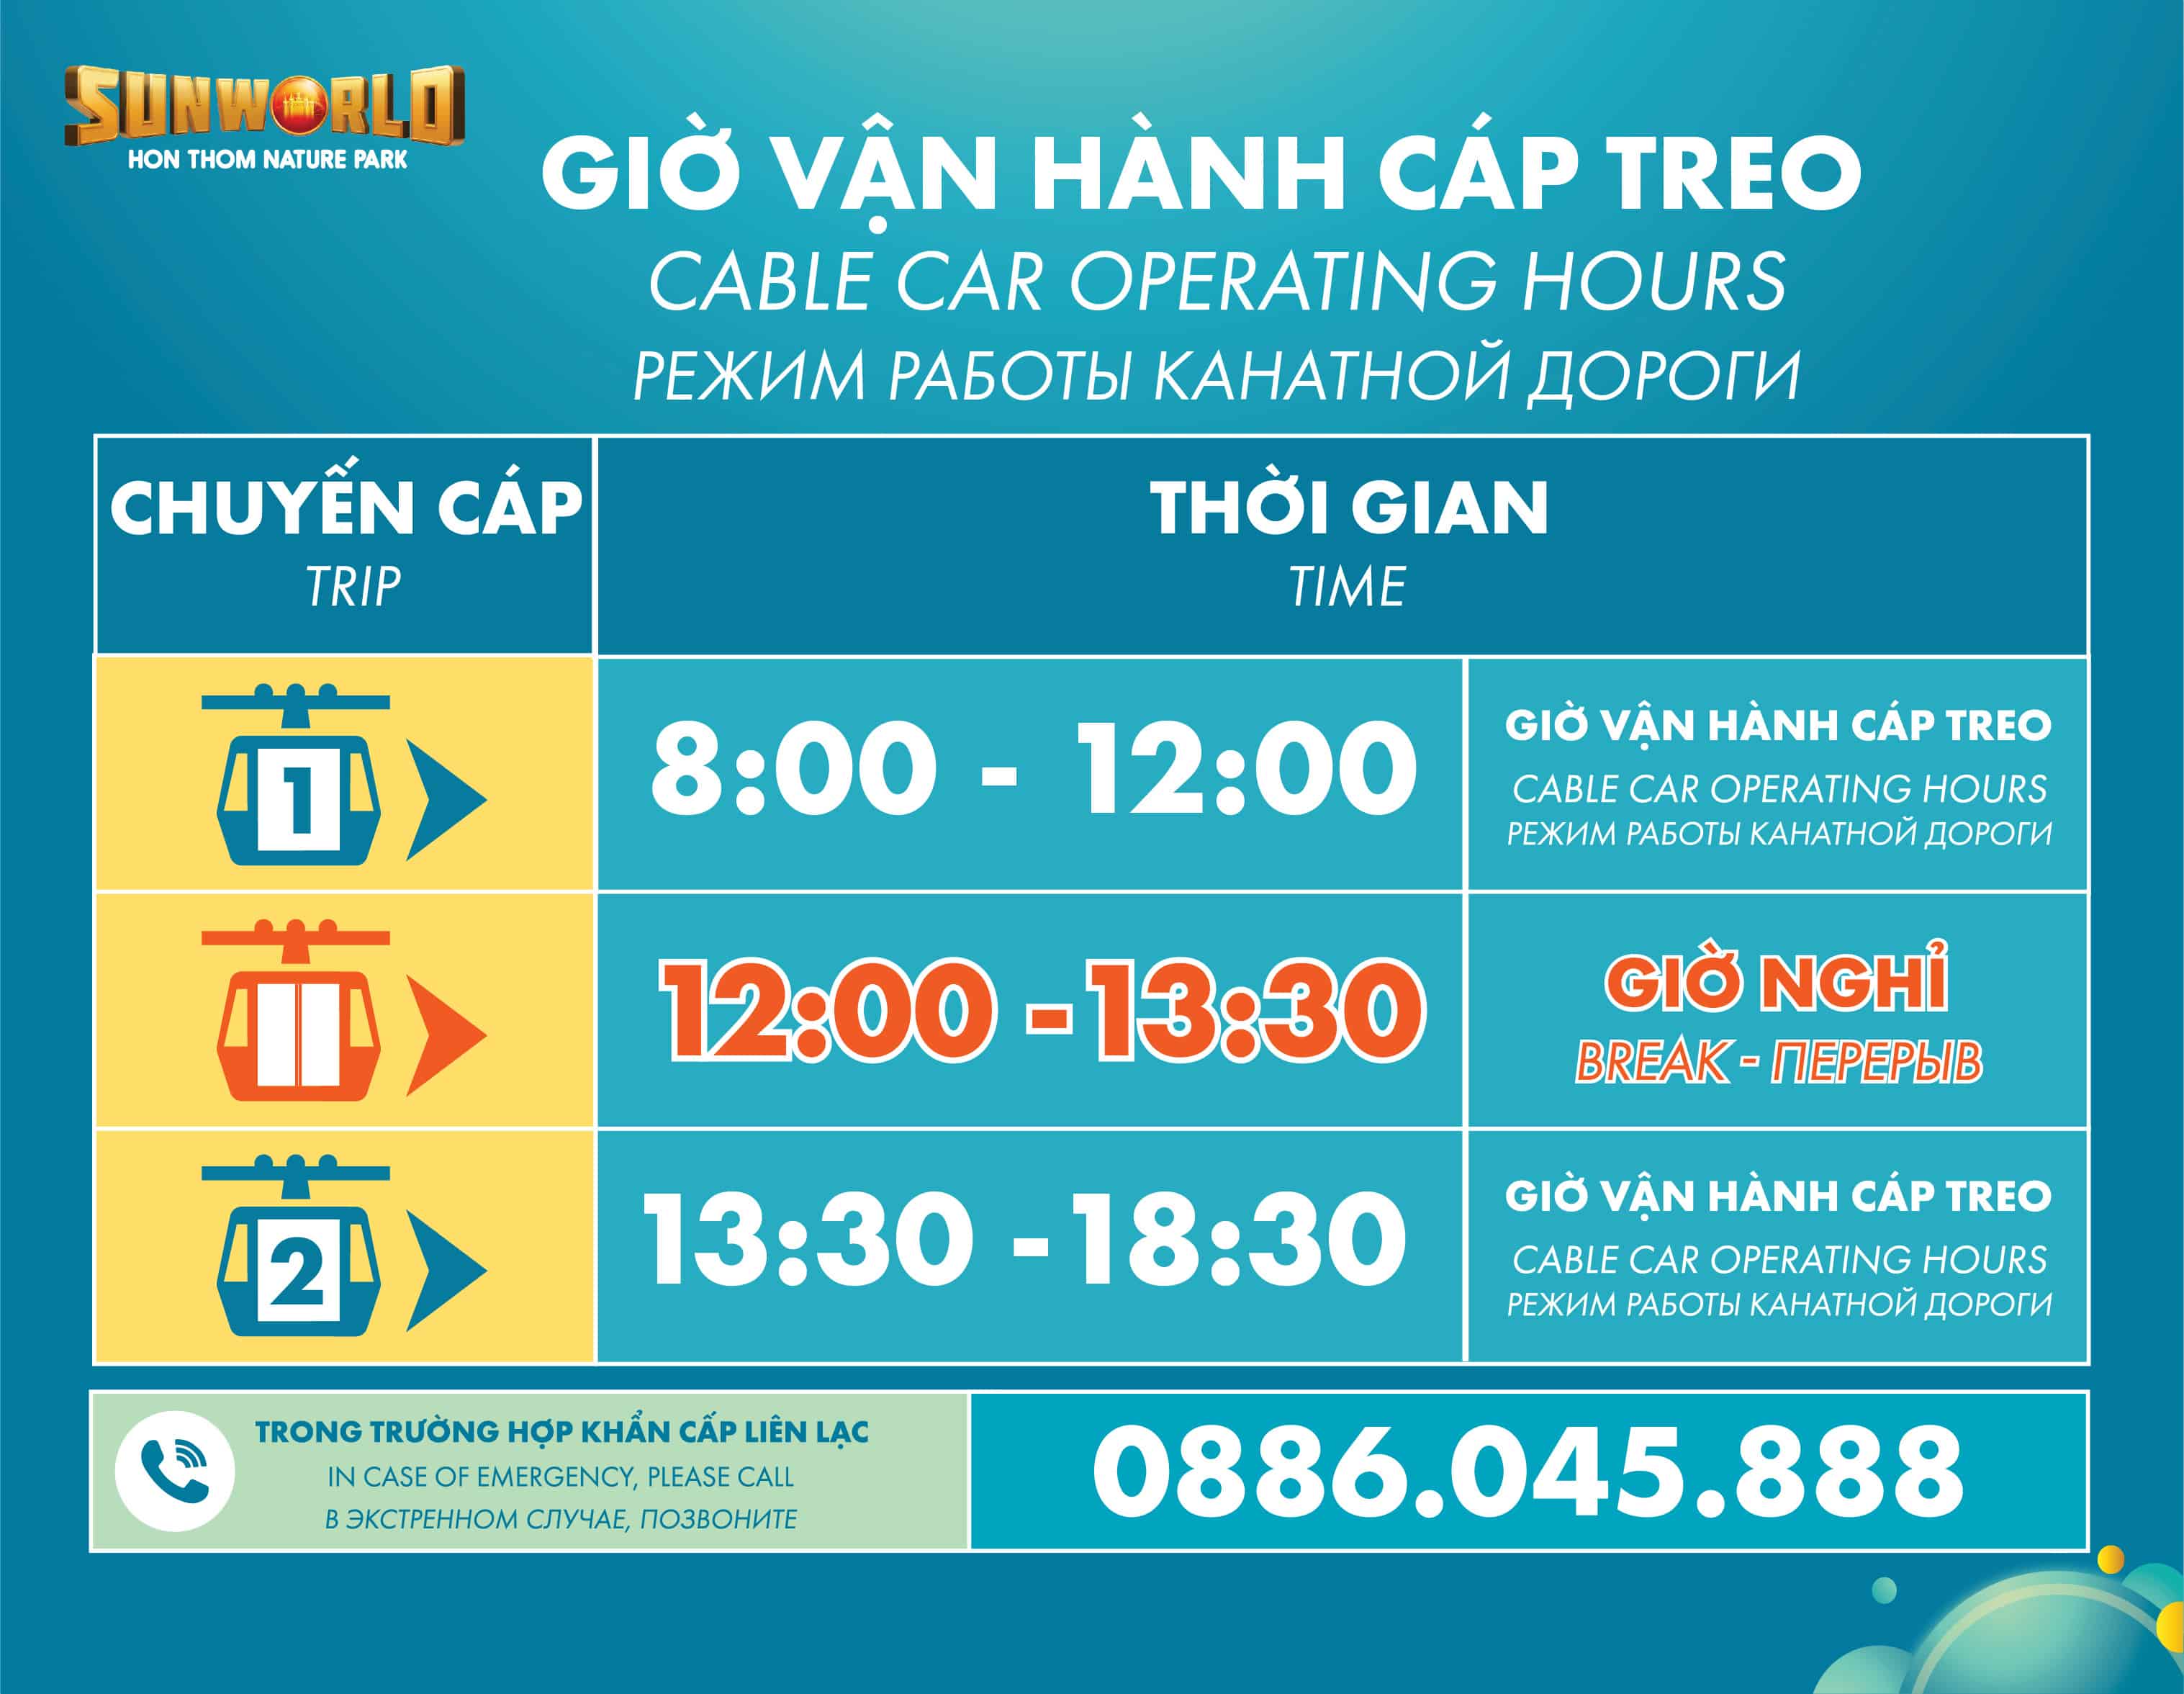 Note: The cable car operation schedule is subject to changes due to the weather